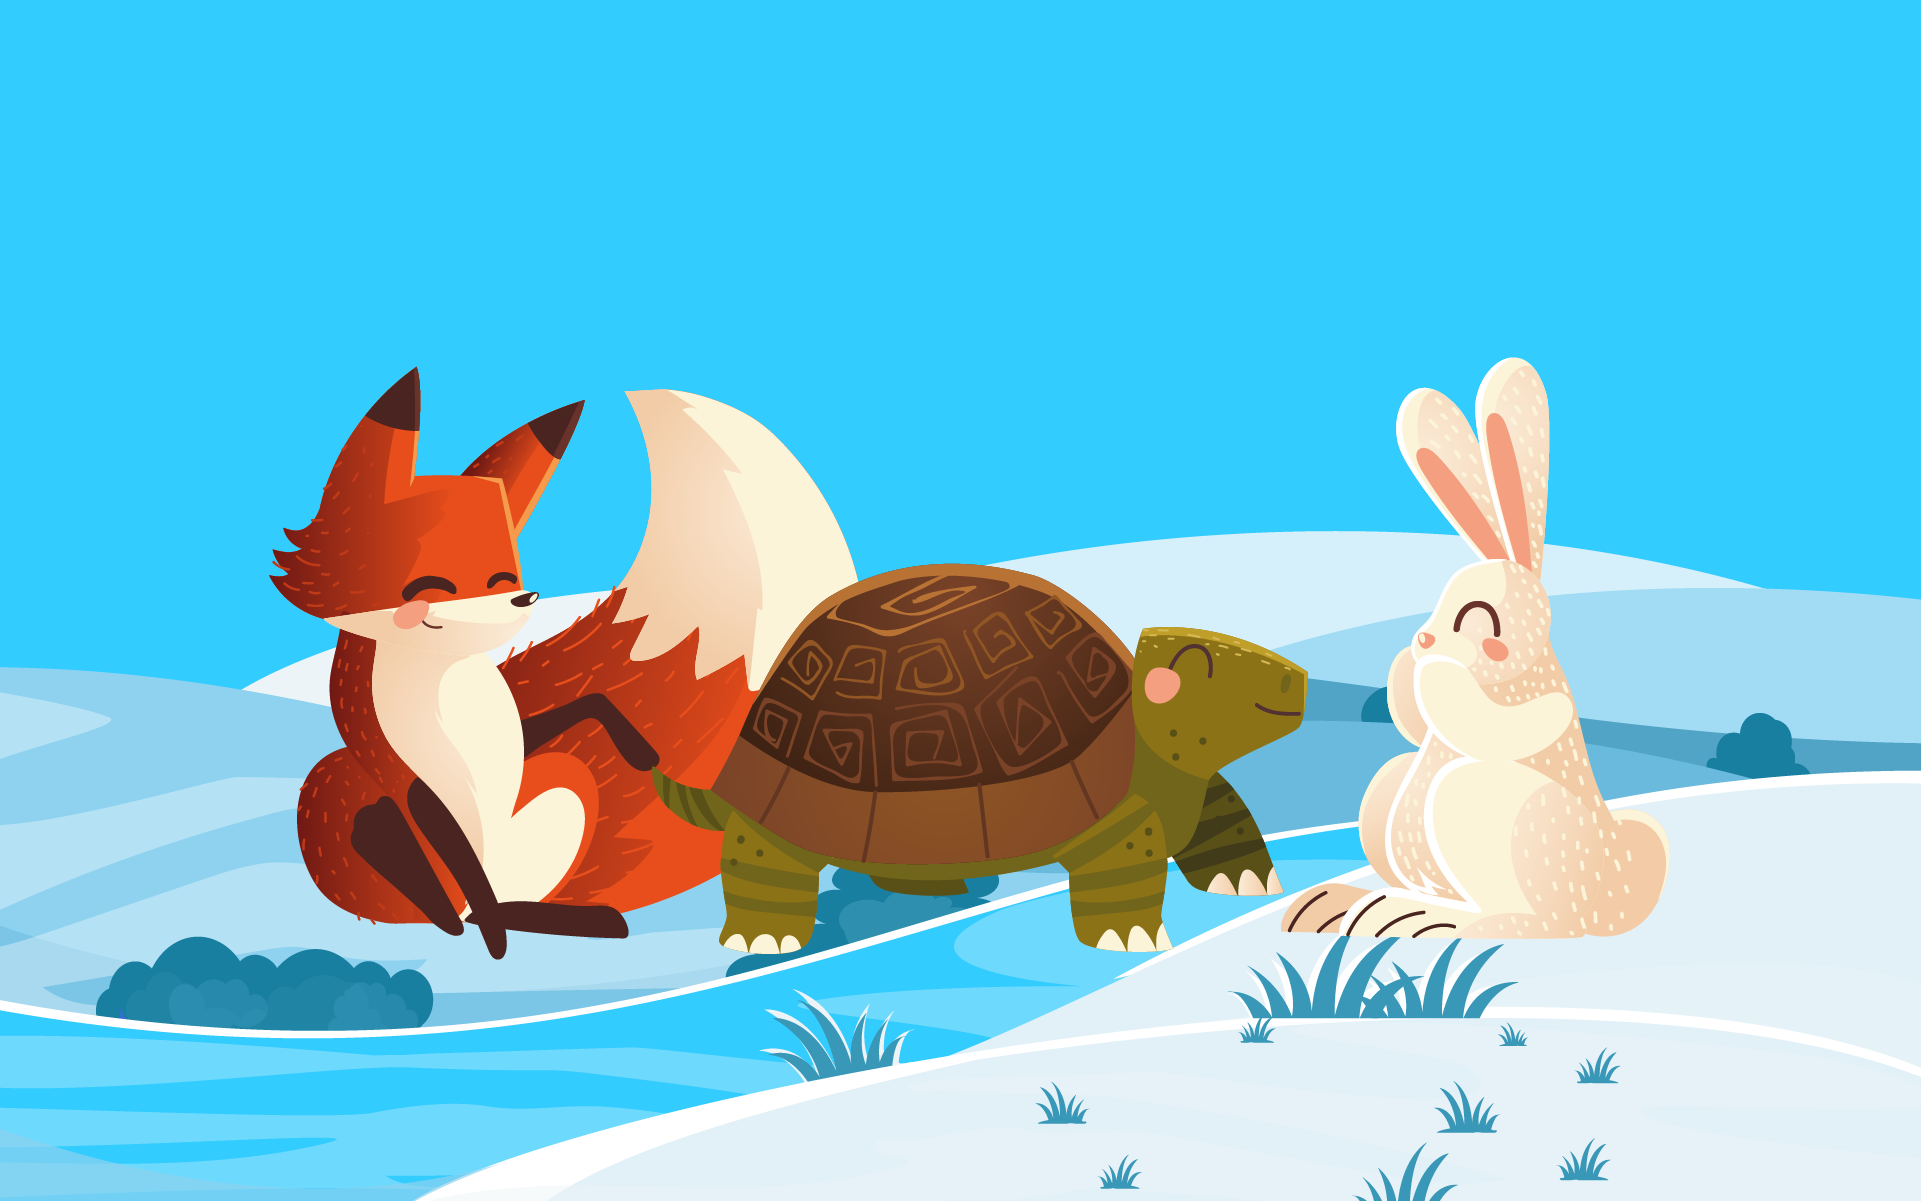 The Fox, the Tortoise, and the Hare